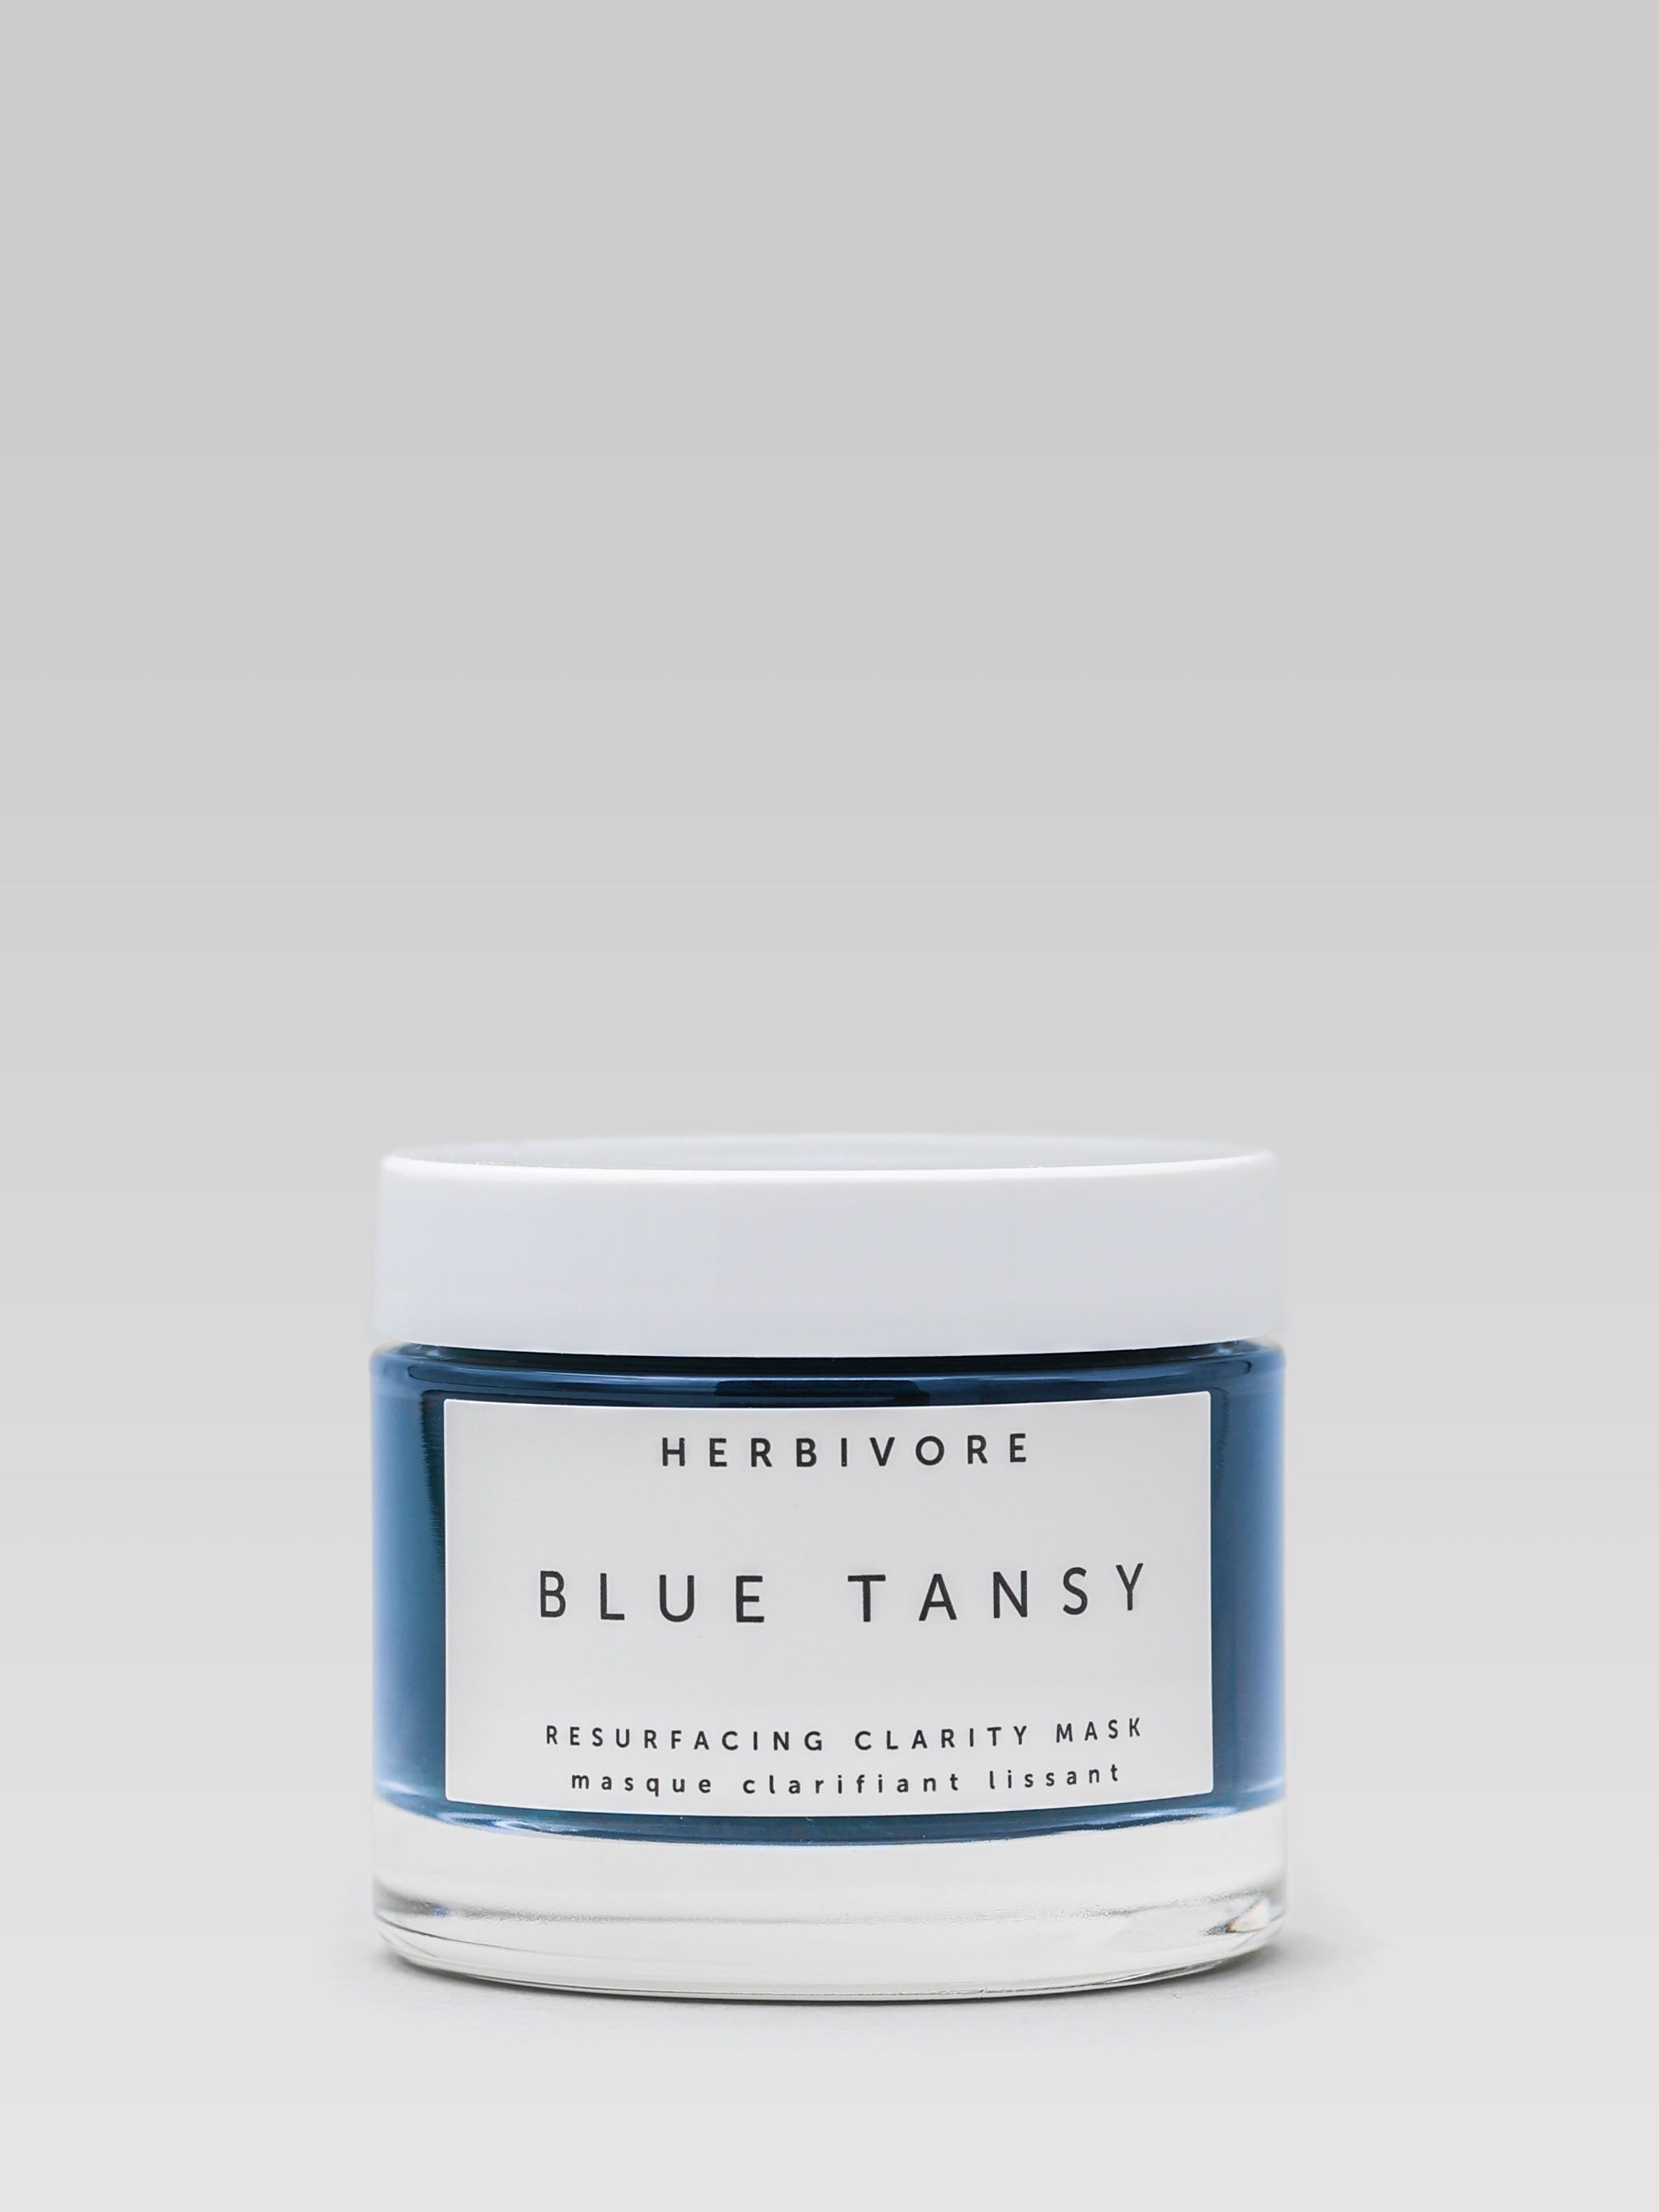 HERBIVORE Blue Tansy Resurfacing Clarity Mask product shot